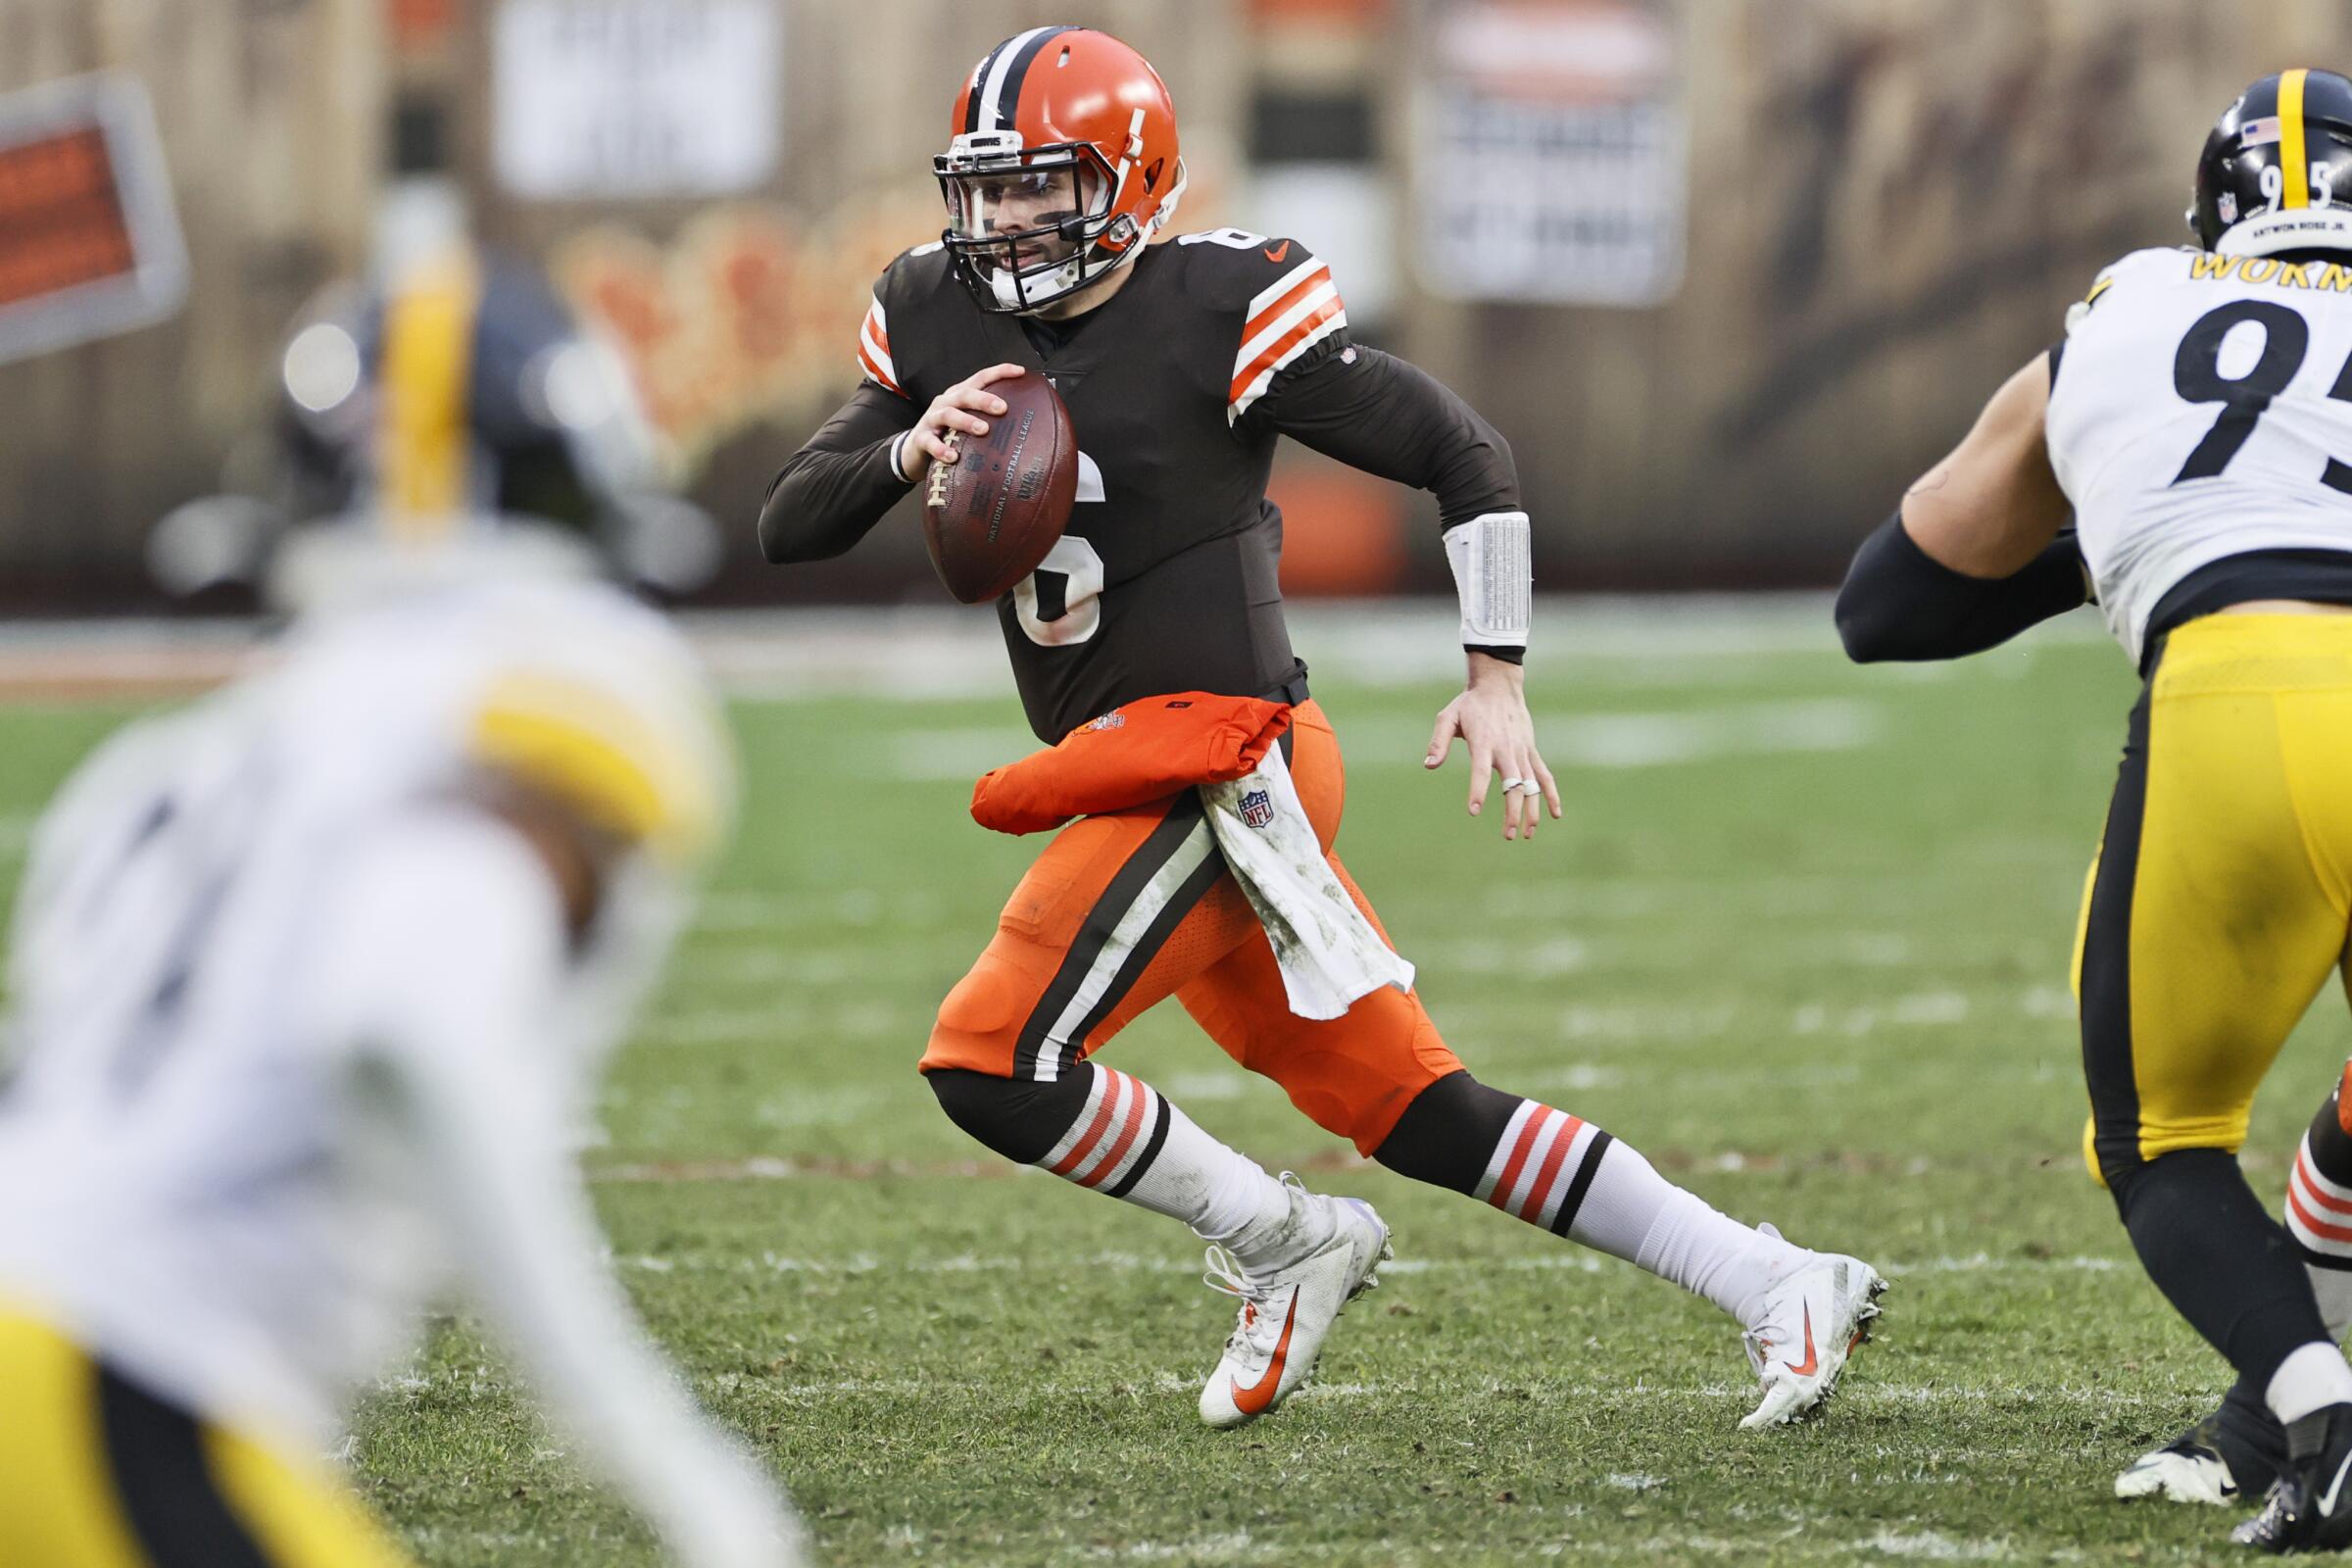 How the Browns beat the Jets to get their first win since 2016